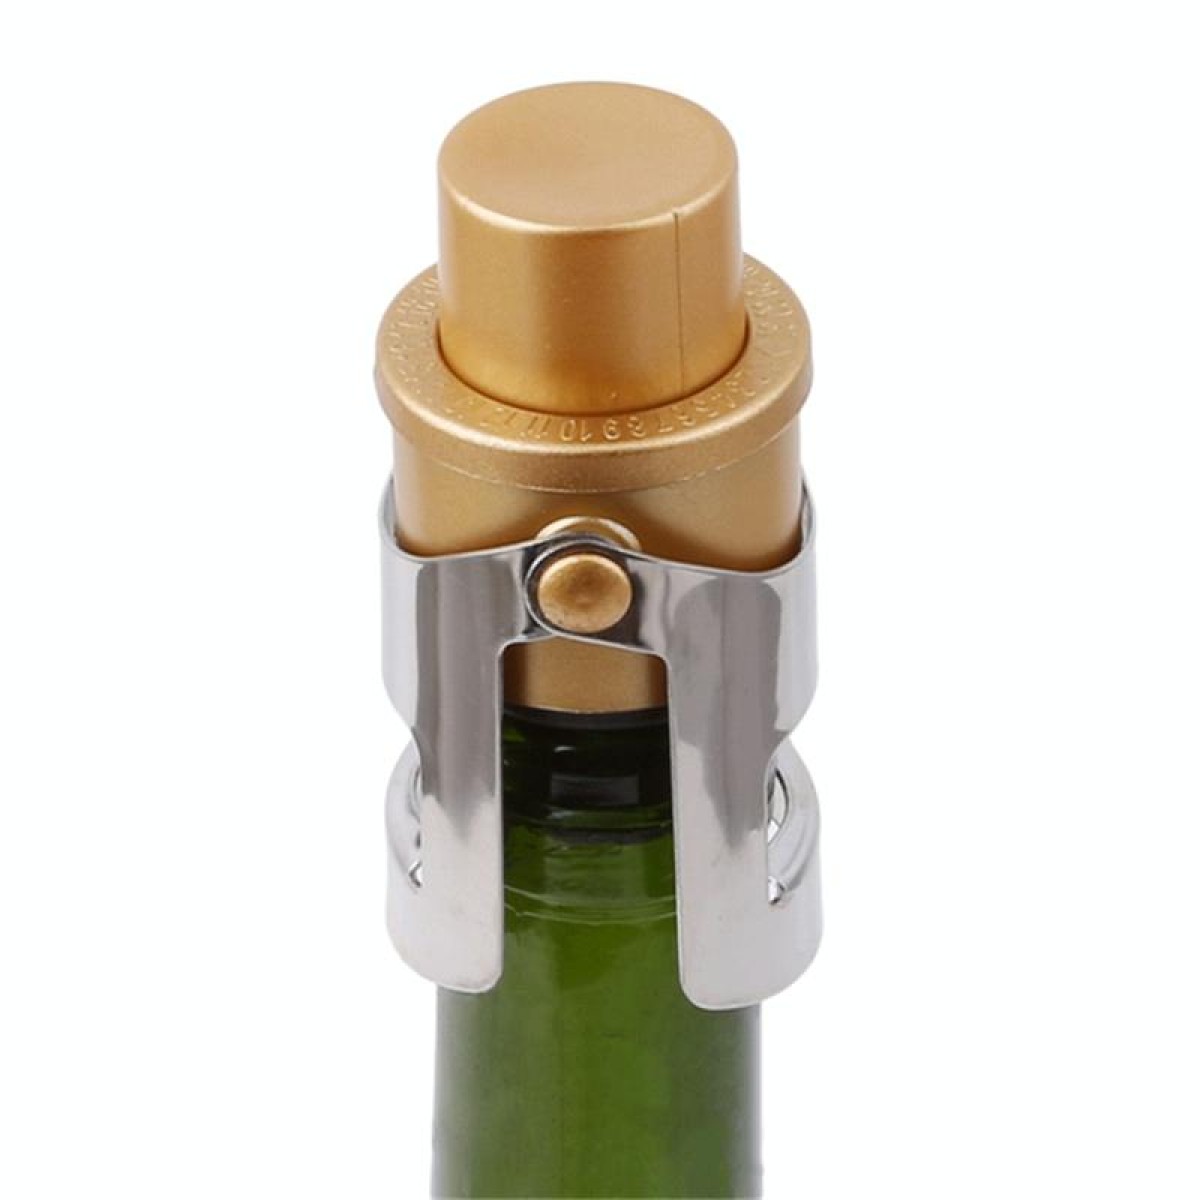 Push-button Stainless Steel Pumping Champagne Stopper Sparkling Champagne Snap Wing Vacuum Wine Stopper(Gold)